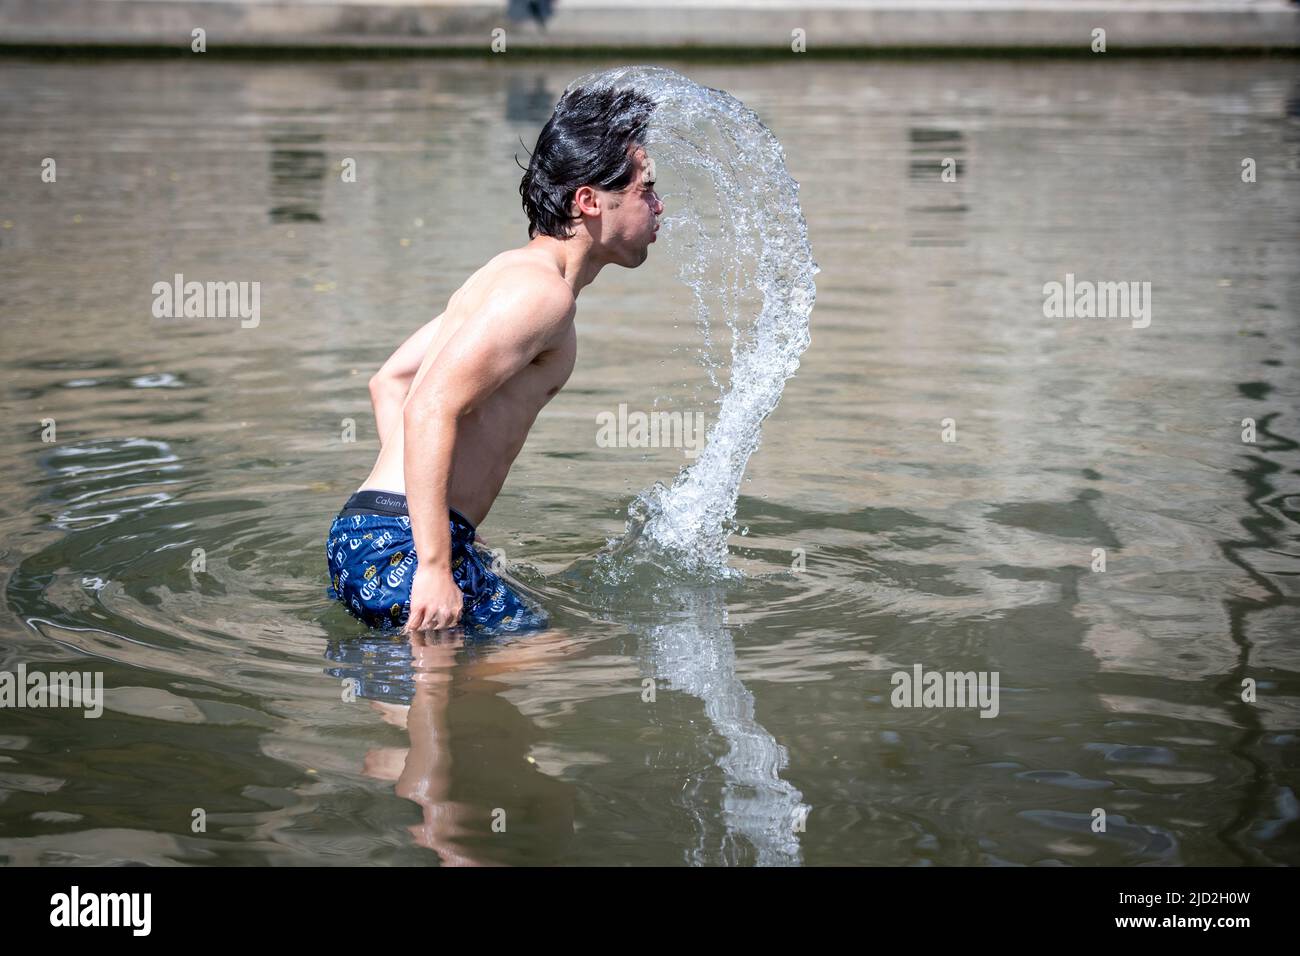 Cambridge, UK. 17th June, 2022. Sawyer Lasof keeps cool in the sunny hot weather by going for a dip in the River Cam. Today is expected to be the hottest day of the year in the UK so far and temperatures are expected to rise above 30c in the heatwave. Credit: Julian Eales/Alamy Live News Stock Photo